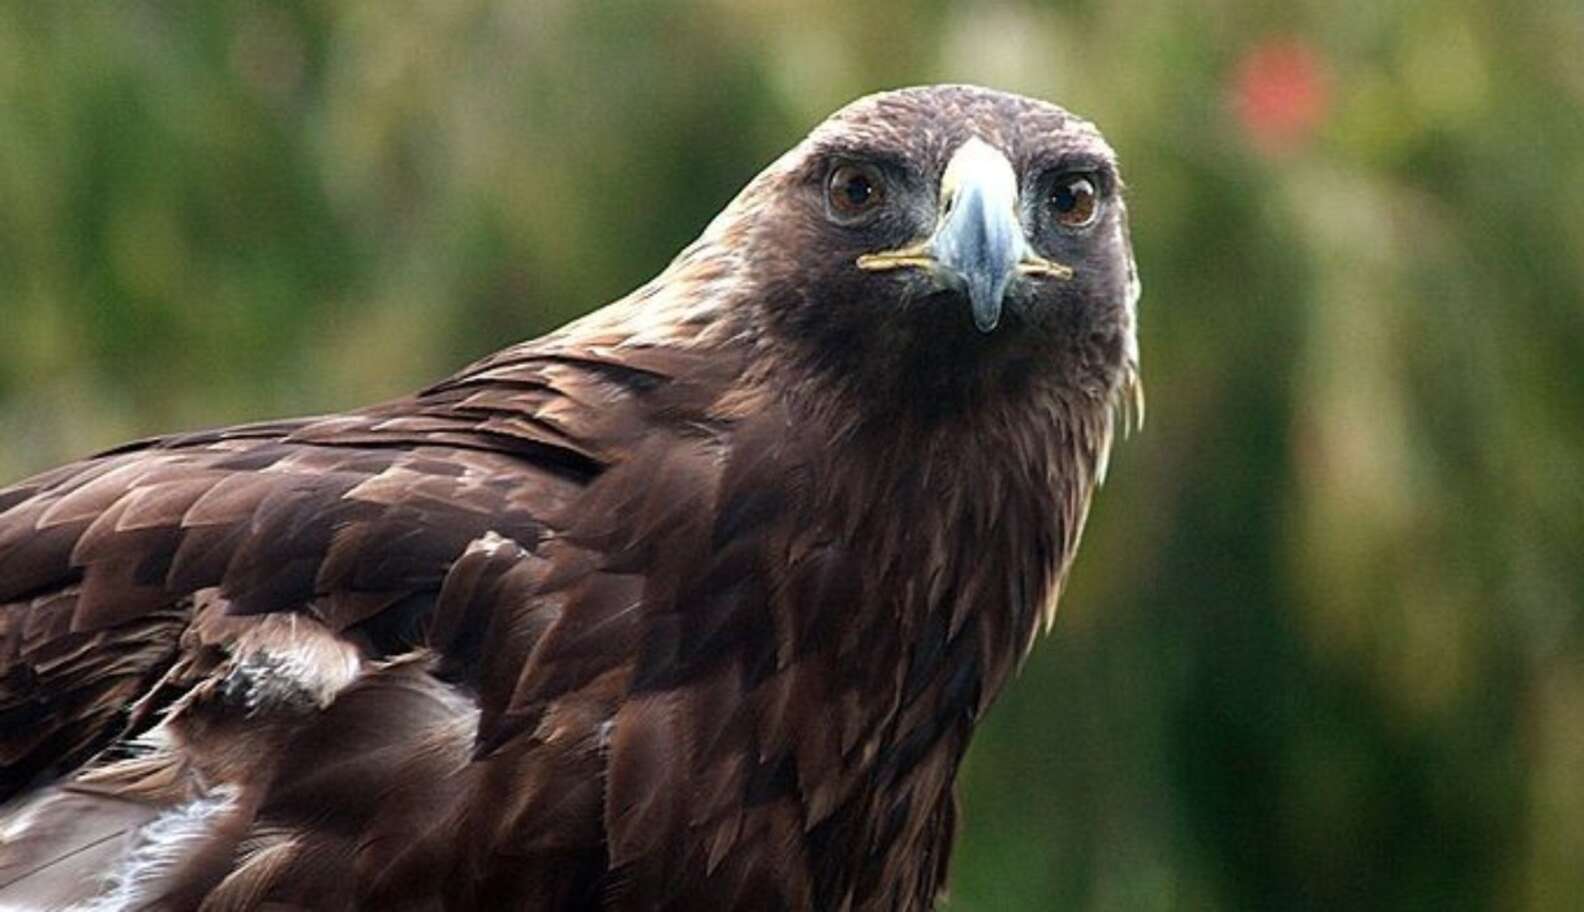 Albania Bans Hunting For 2 Years To Save Endangered Species - The Dodo